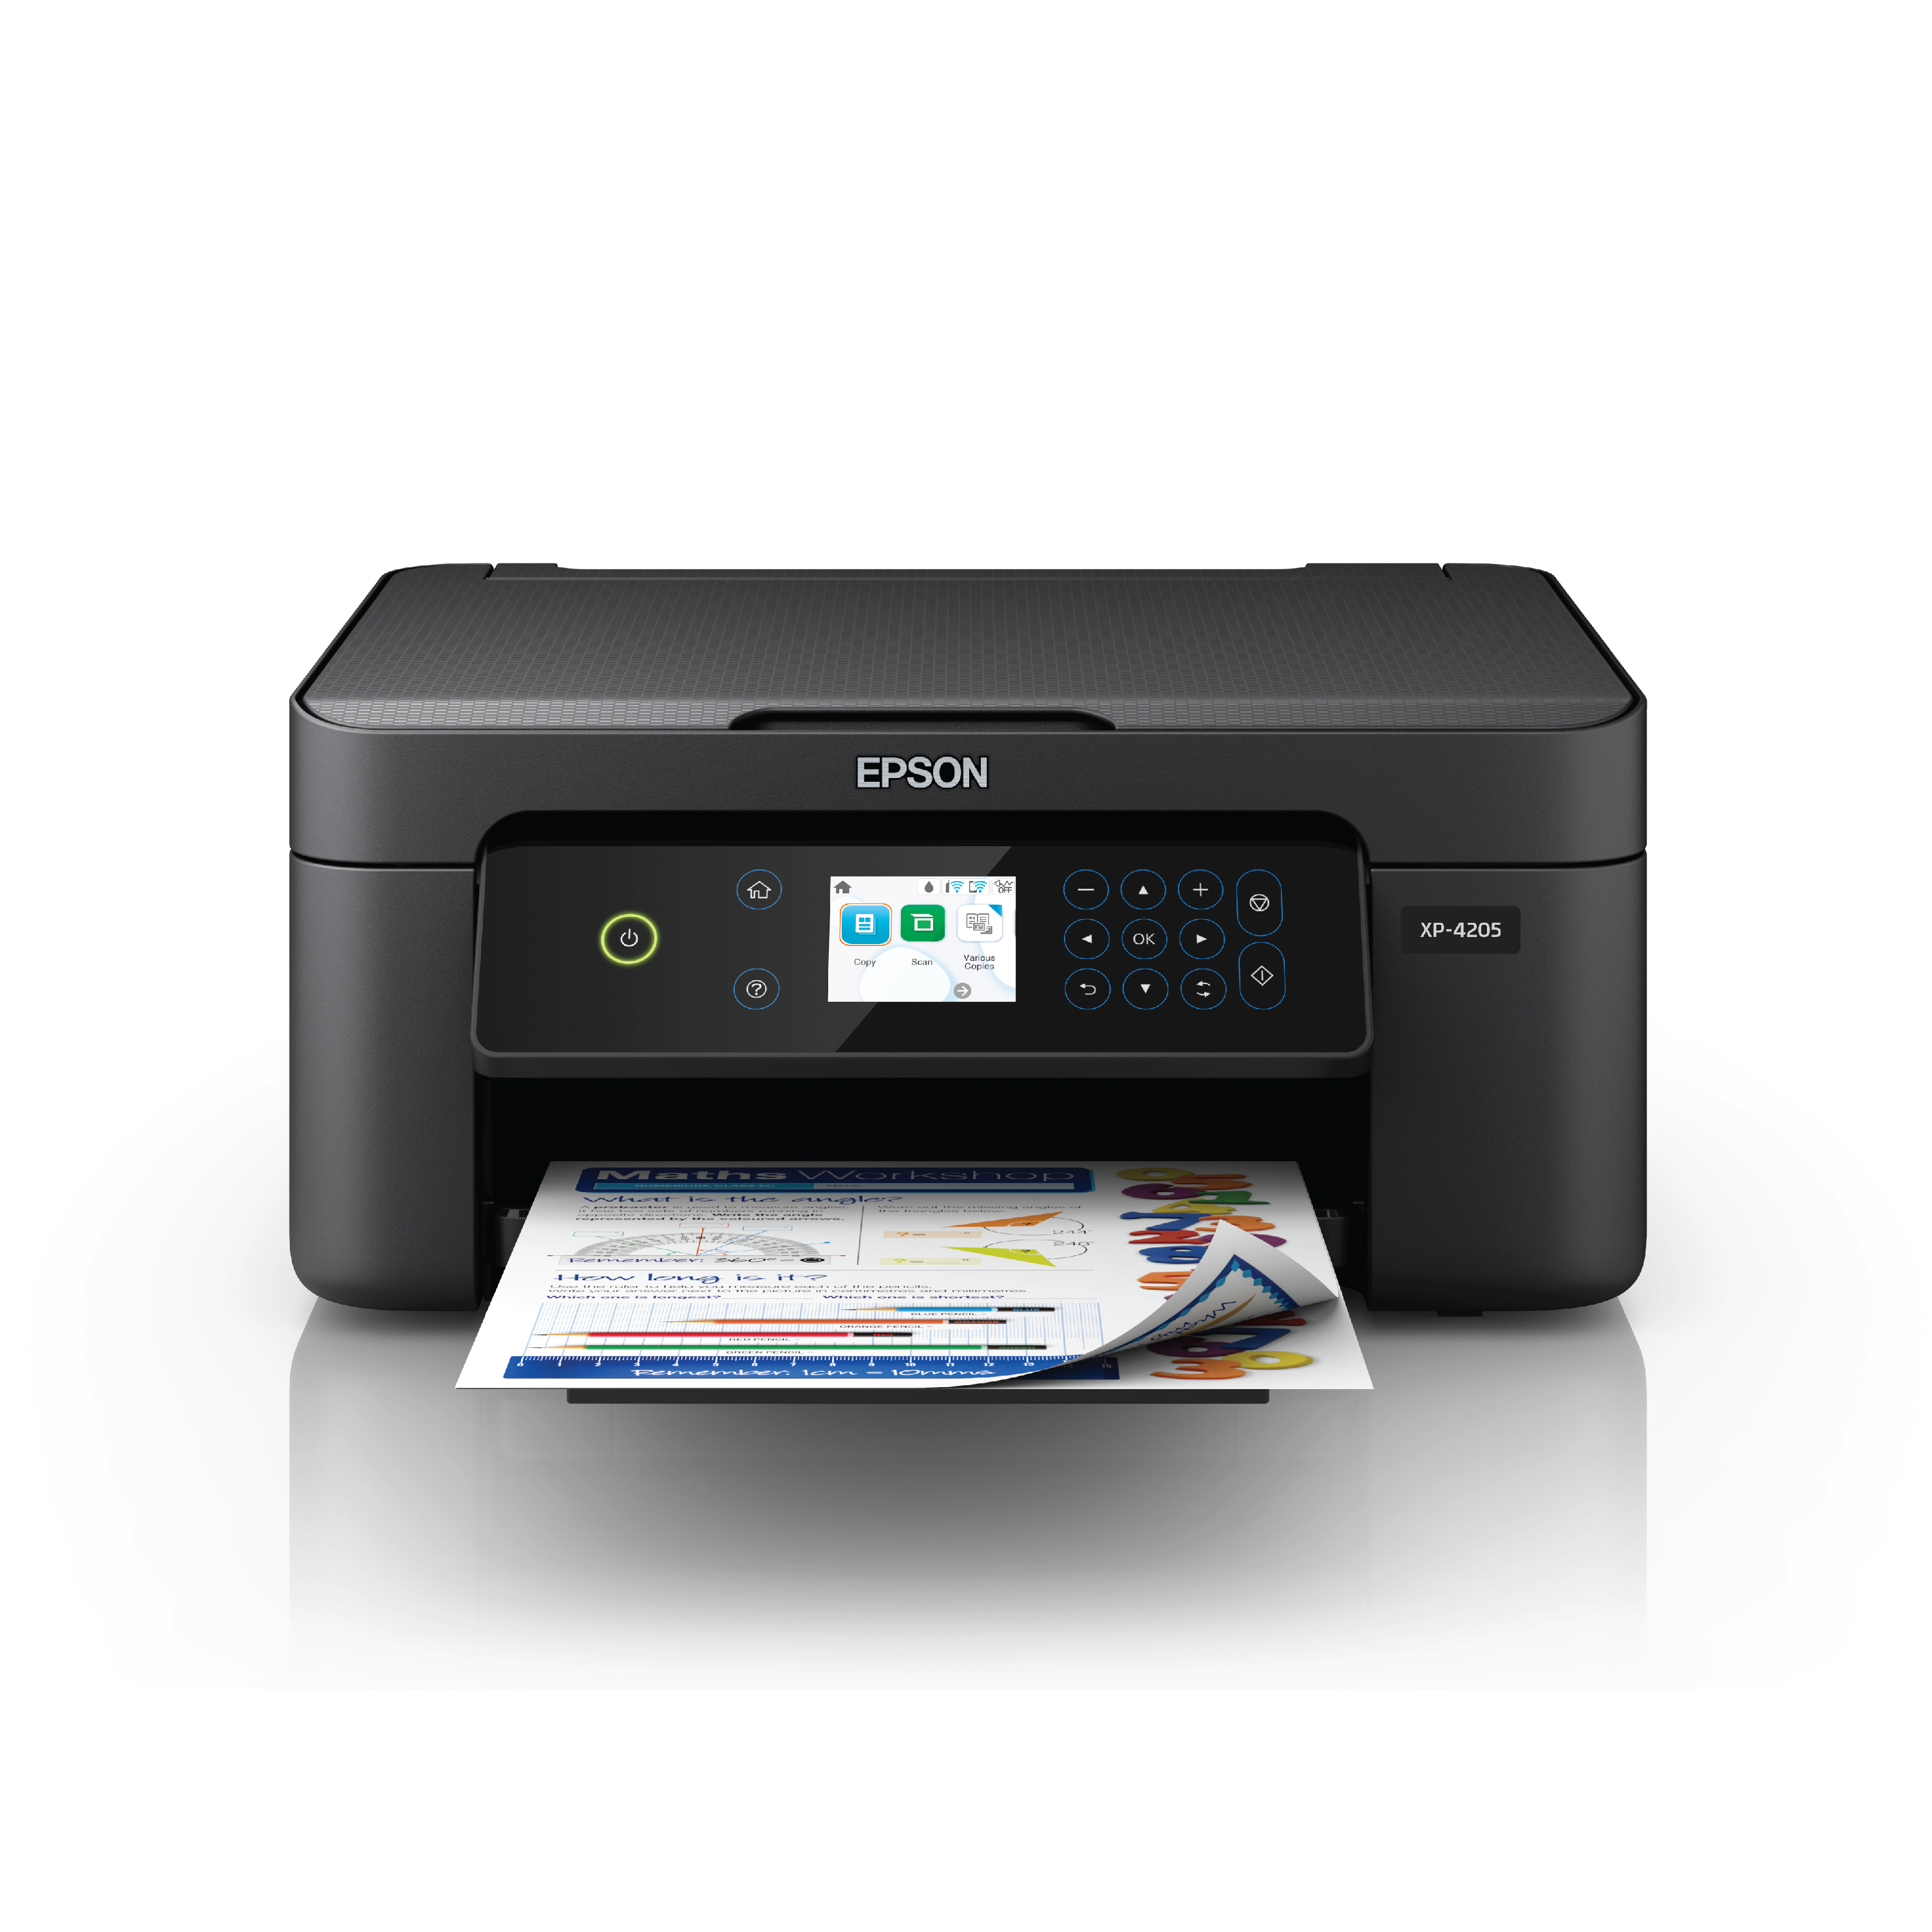 Epson Expression Home XP-4205 Wireless Color Printer with Scanner and Copier - image 1 of 6